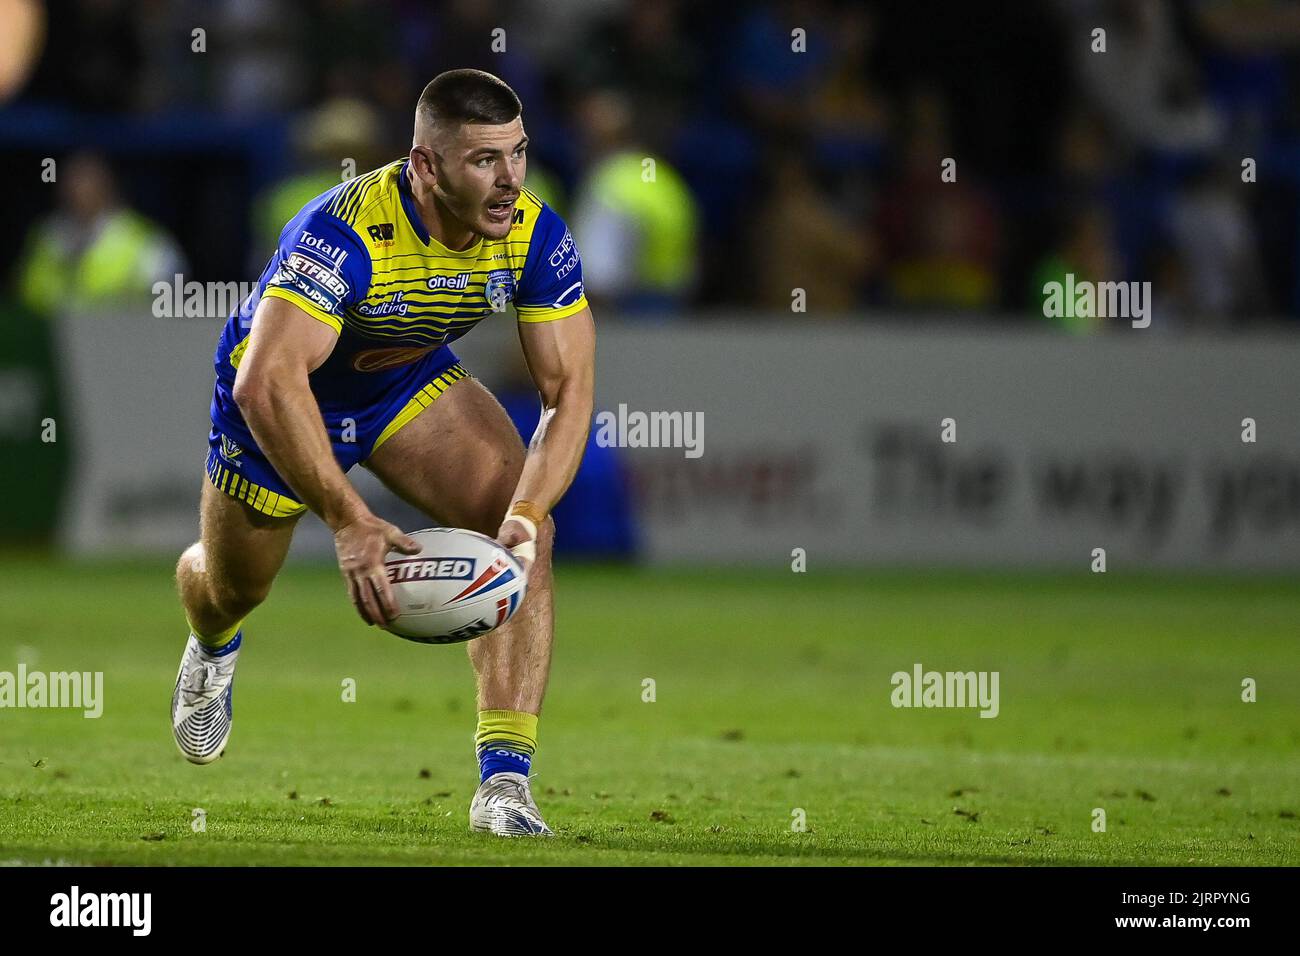 Danny Walker #16 of Warrington Wolves during the game Stock Photo